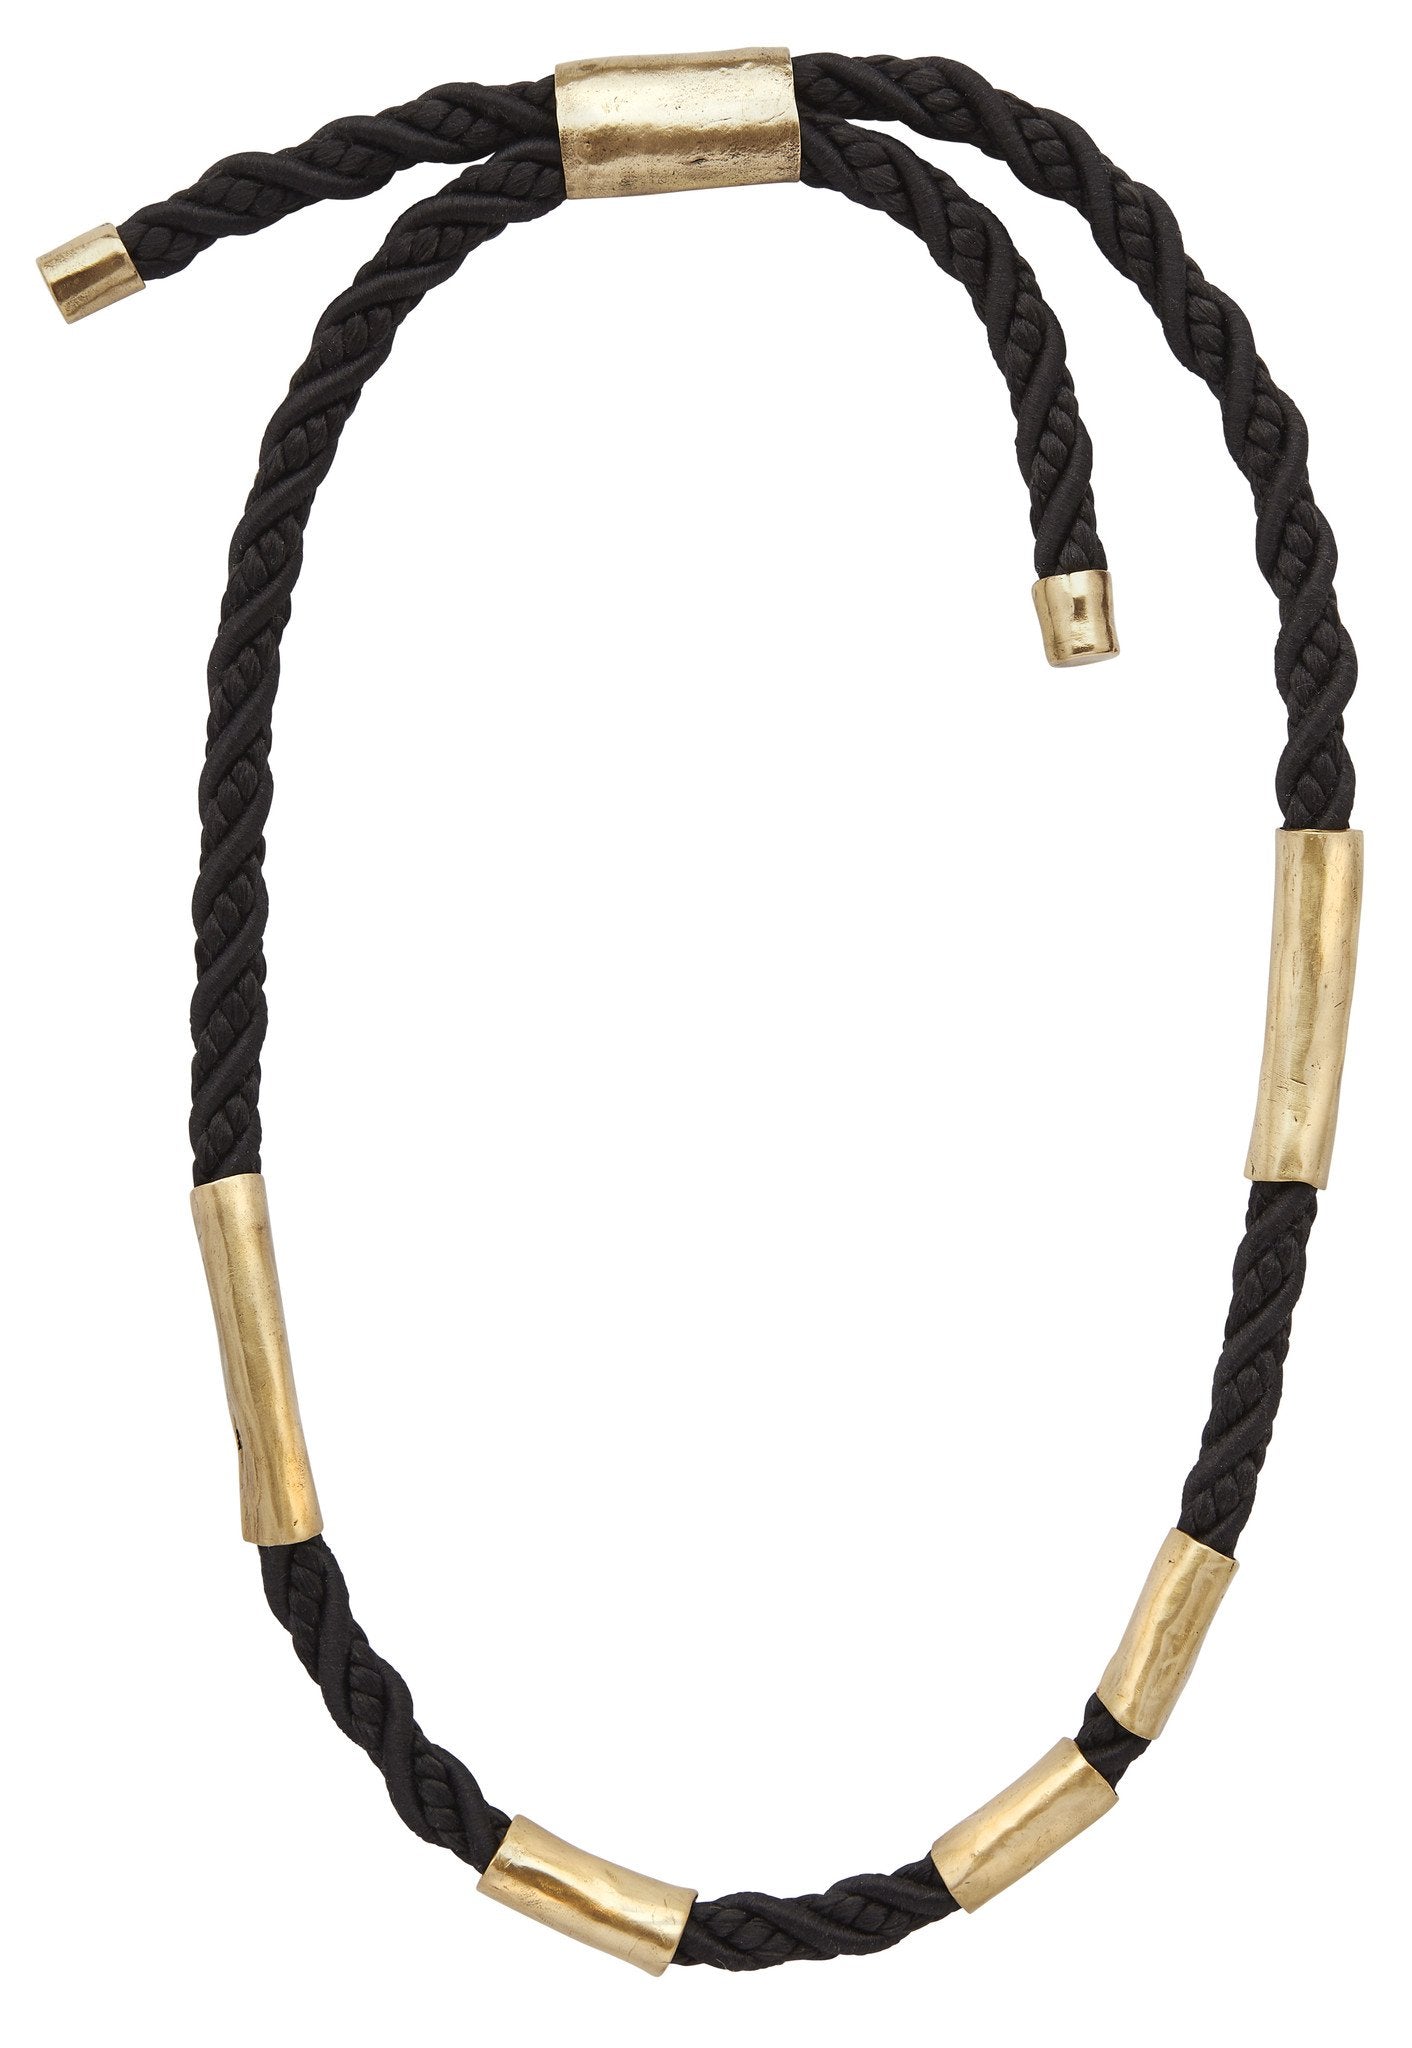 Julie Cohn Maxi Corda Necklace, bronze beads on a thick black cord, found at PATRICIA in Southern Pines and Raleigh, NC